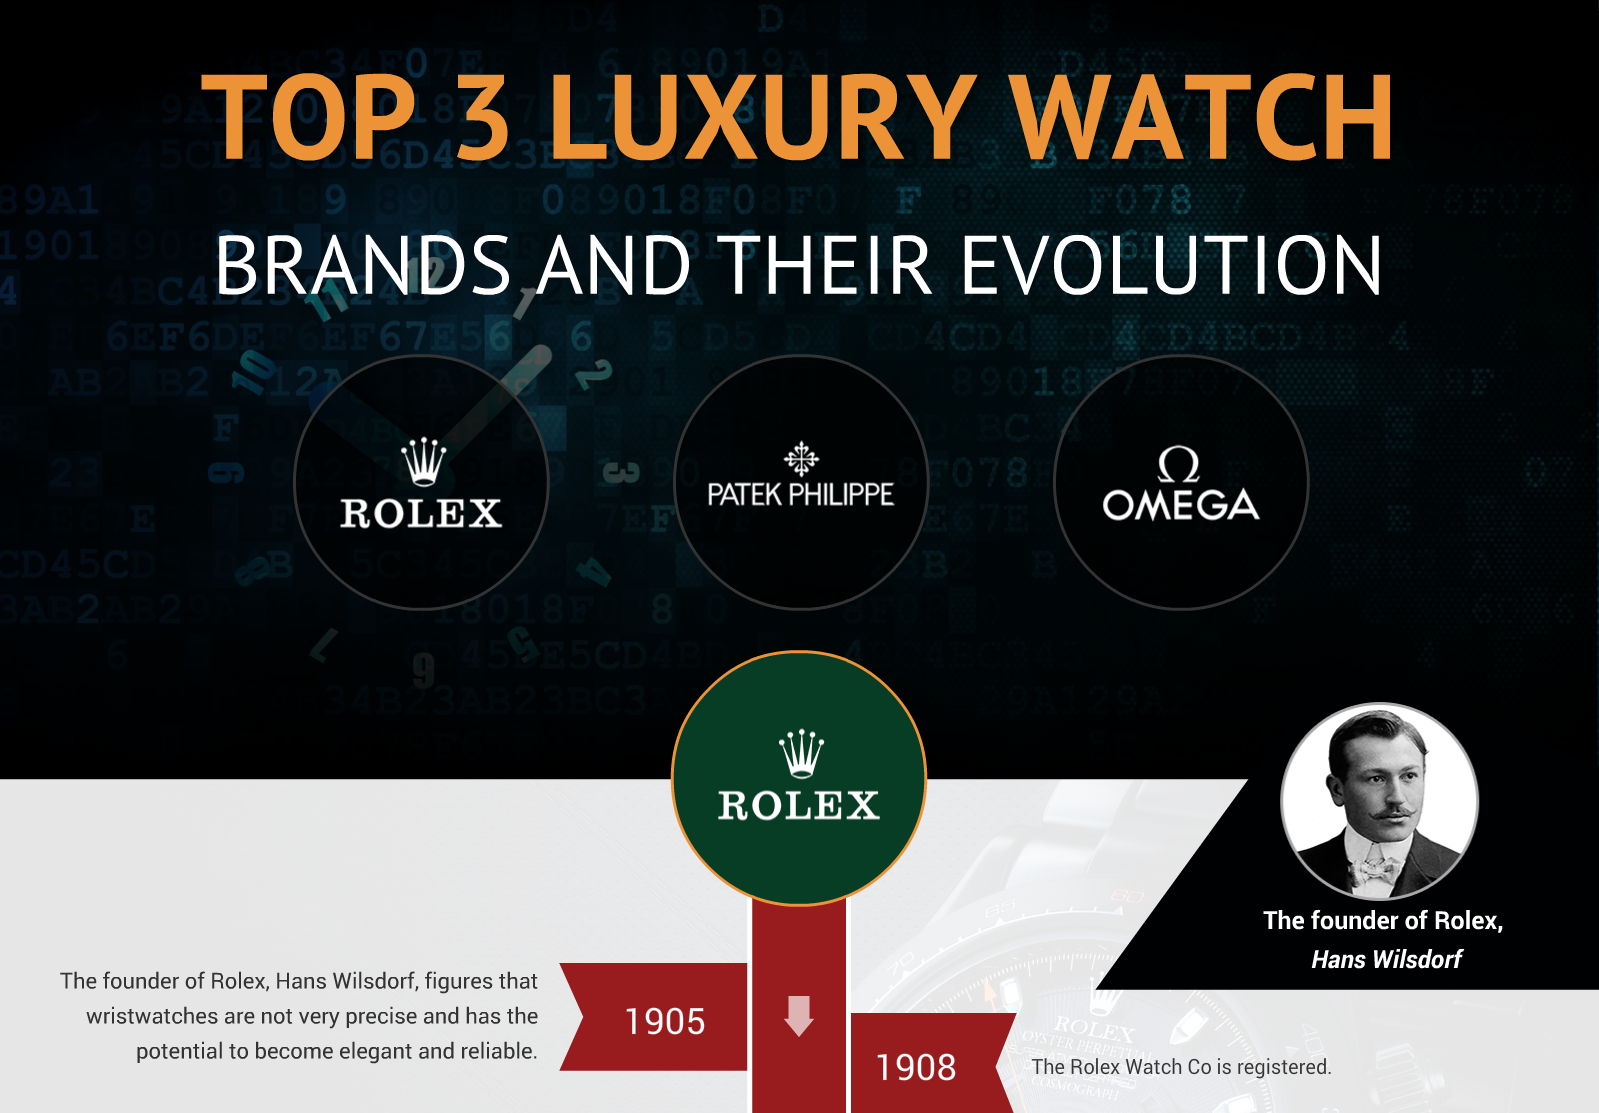 Top 3 luxury watch brands and their evolution, Rolex, Patek Philippe, and Omega infographic showing product progression throughout the years